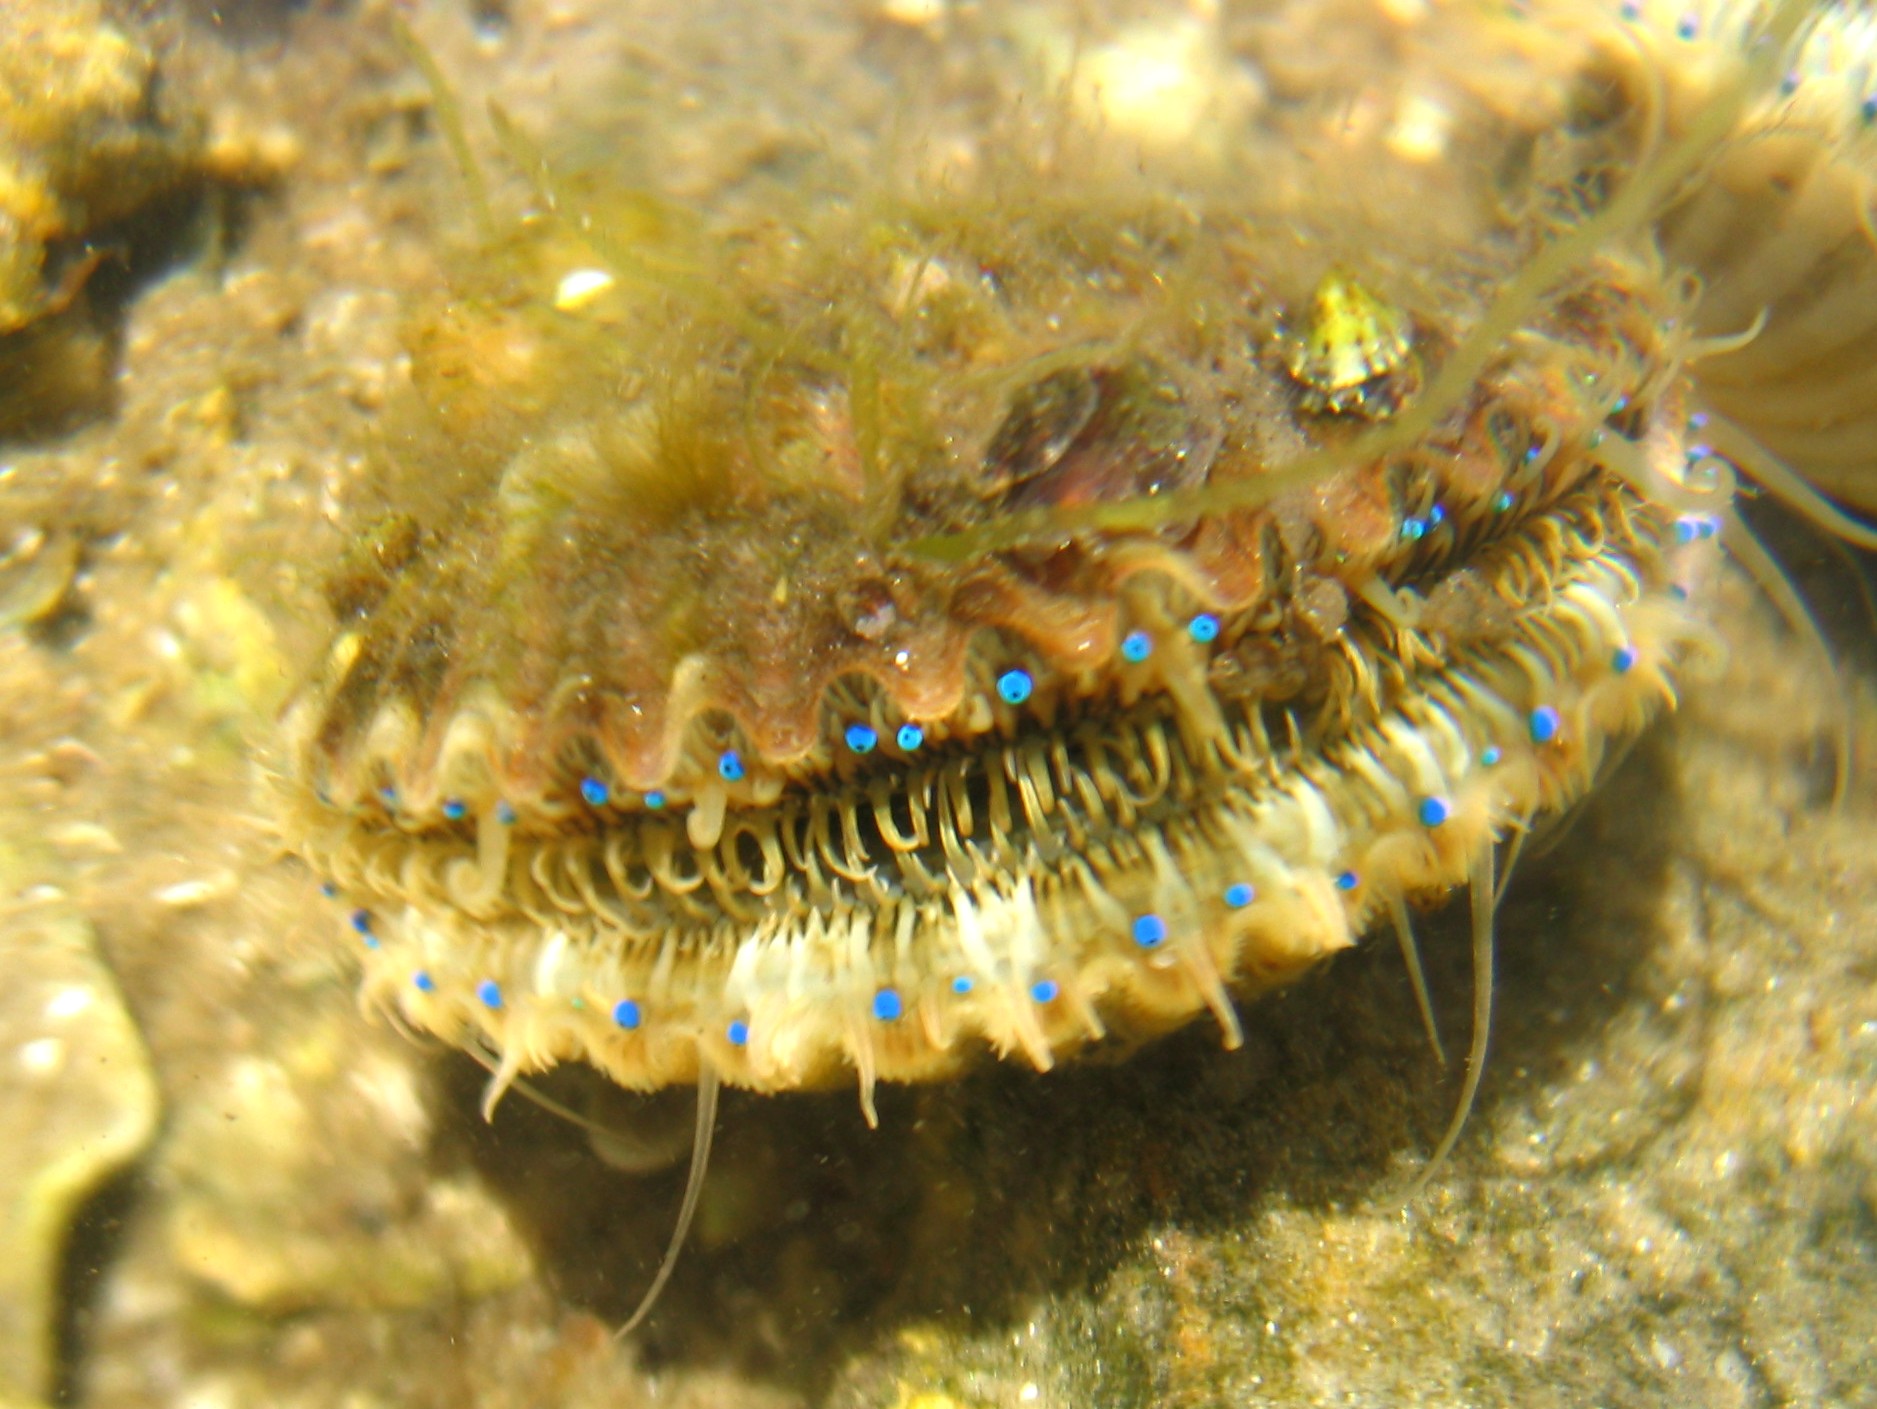 An adult bay scallop using its many blue eyes to sense the surrounding environment.